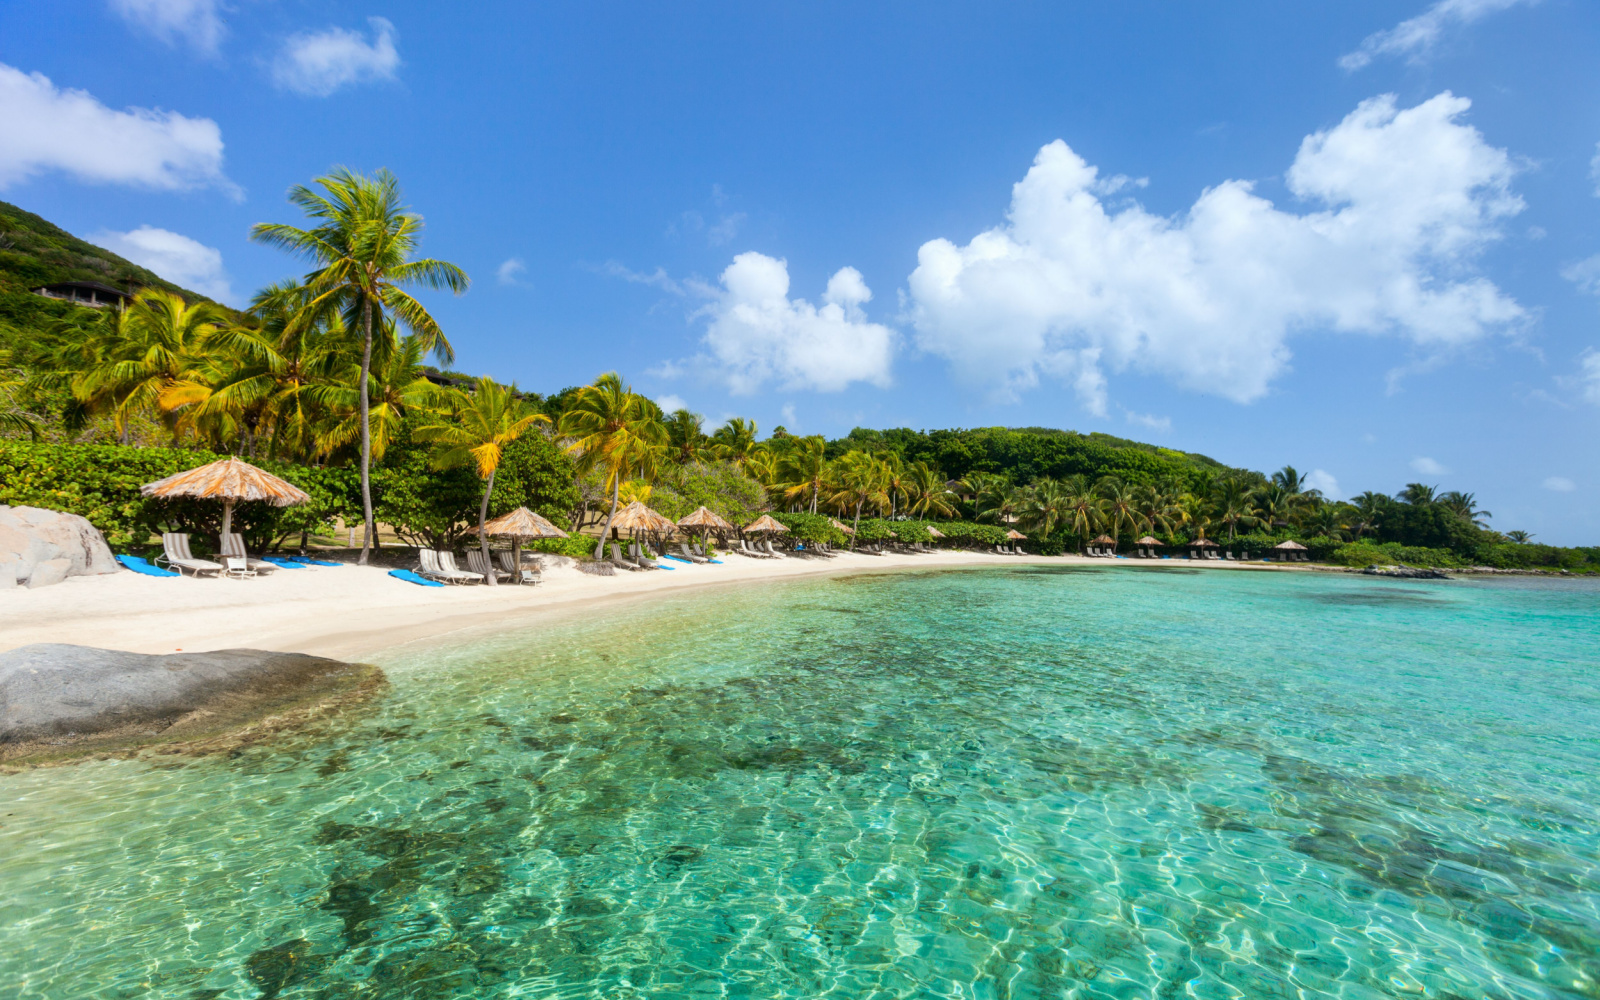 What Are the Caribbean Islands? (The 10 Biggest)